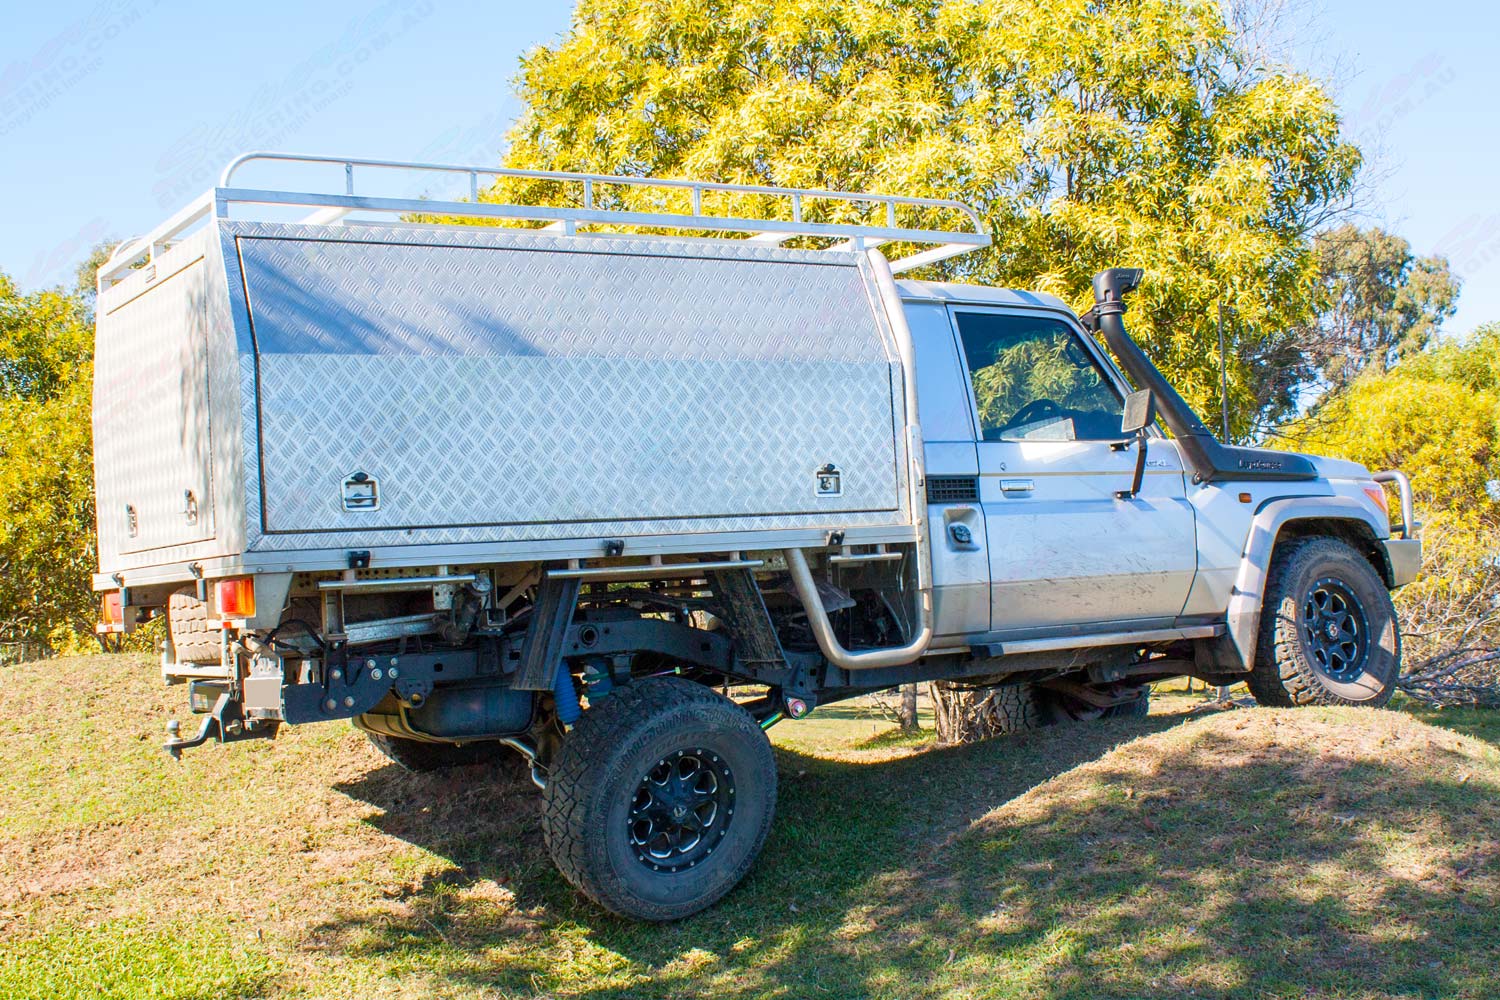 Right side view of a Silver 79 Series Single Cab Toyota Landcruiser at the Superior Engineering workshop fitted out with a new rear coil conversion kit, front suspension and airbag kit